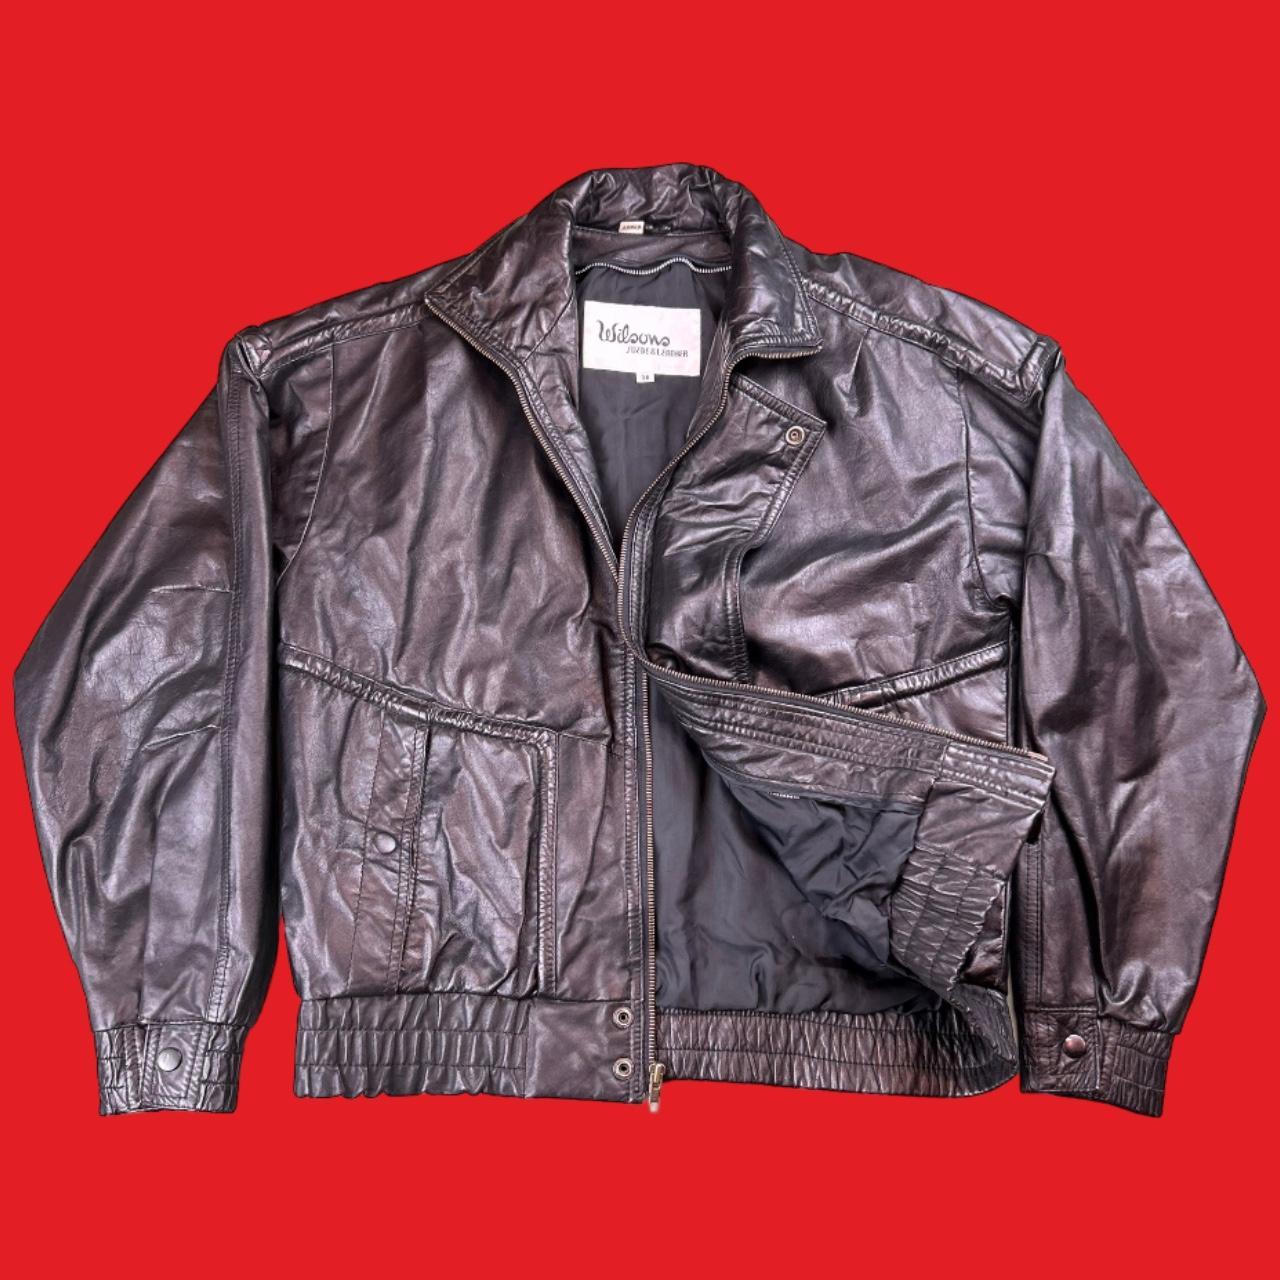 WILSONS LEATHER Jacket - Zip up leather jacket with